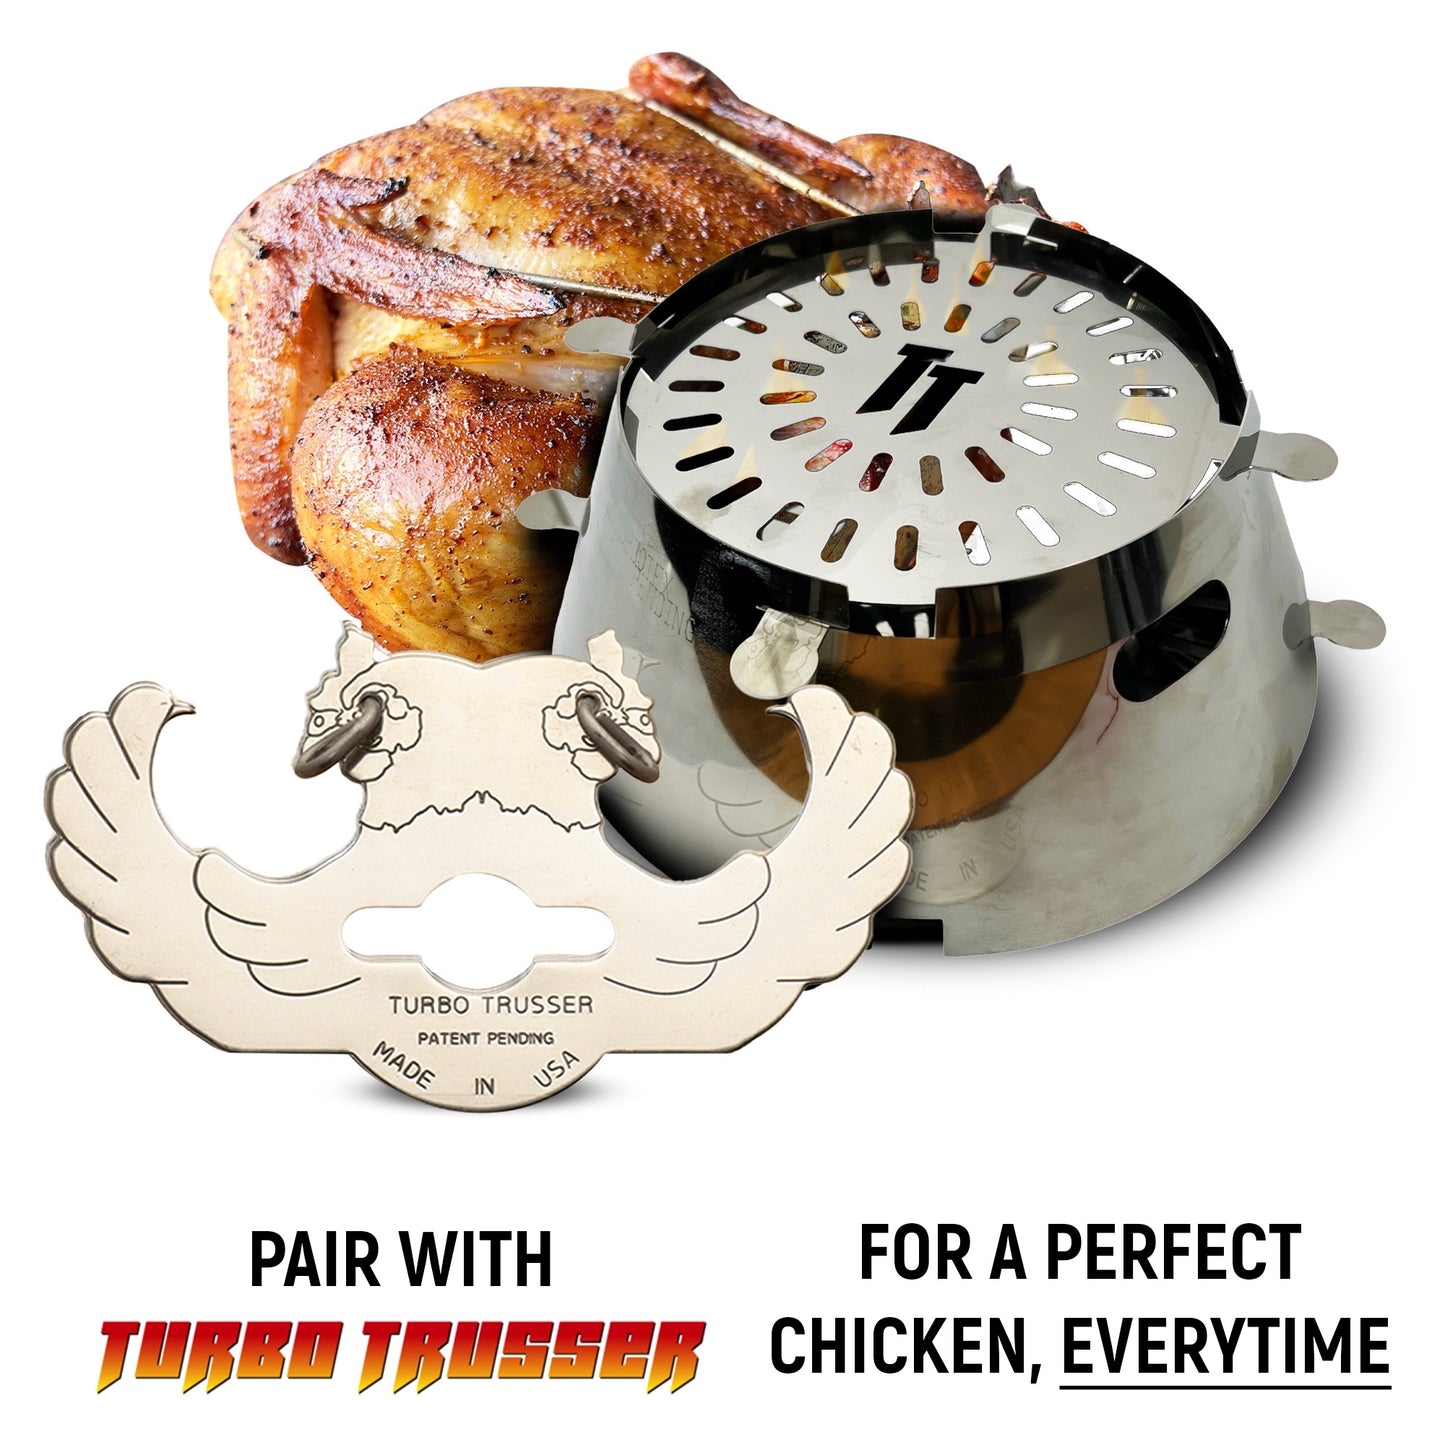 TurboTex | BBQ Whirlpool |Stainless Steel |  Compatible with Weber Kettle, Big Green Egg, Kamado Joe | Vortex Style Cooking